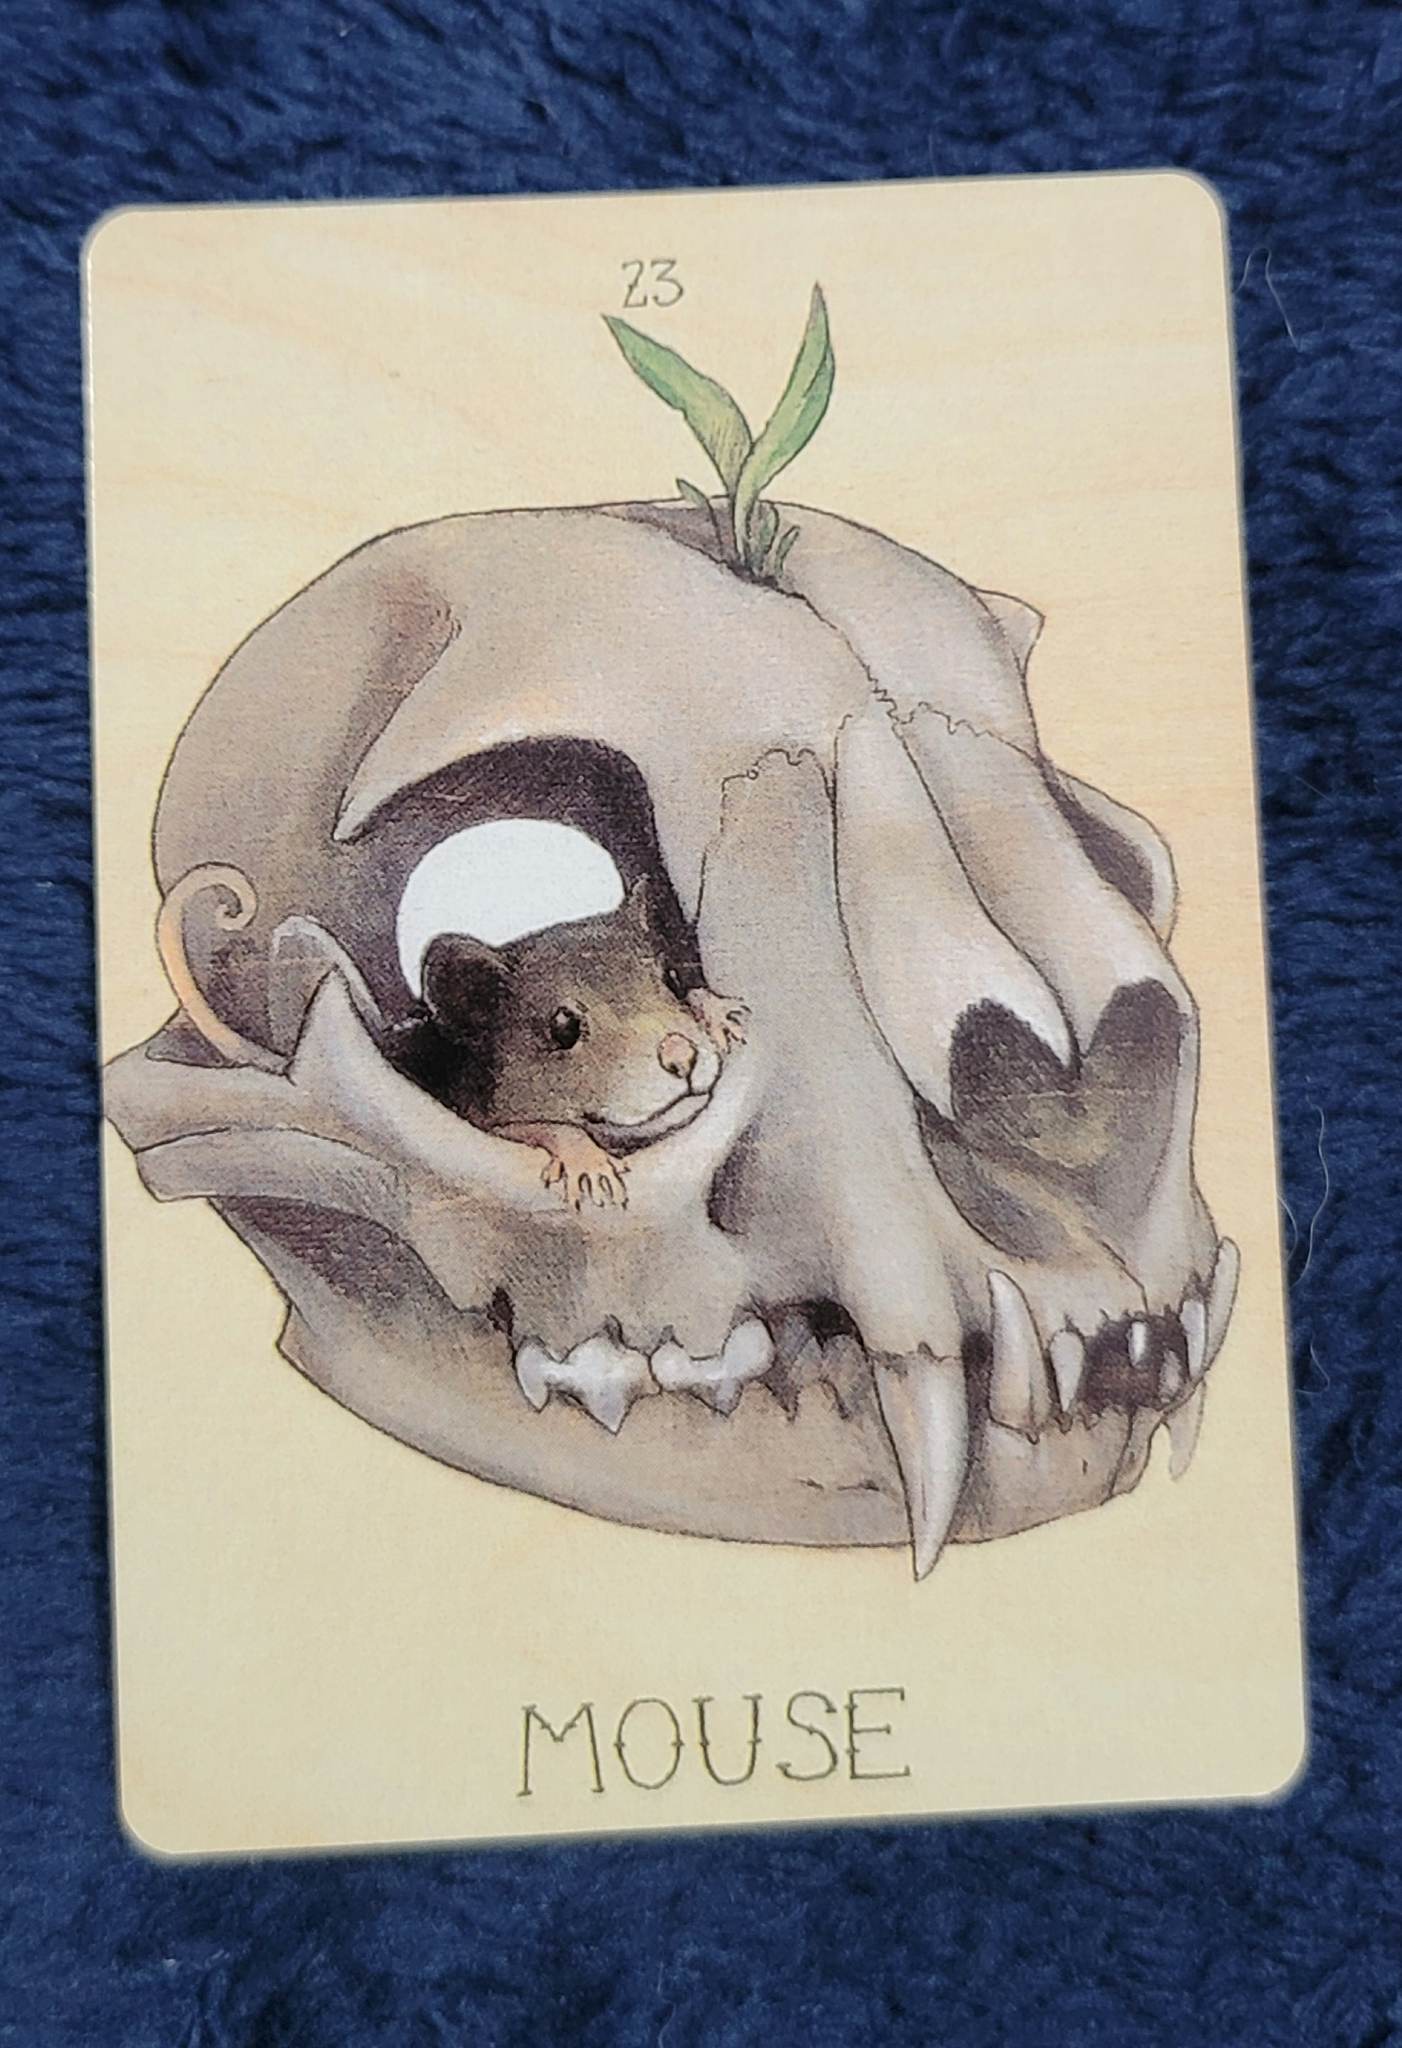 Lenormand card, mouse